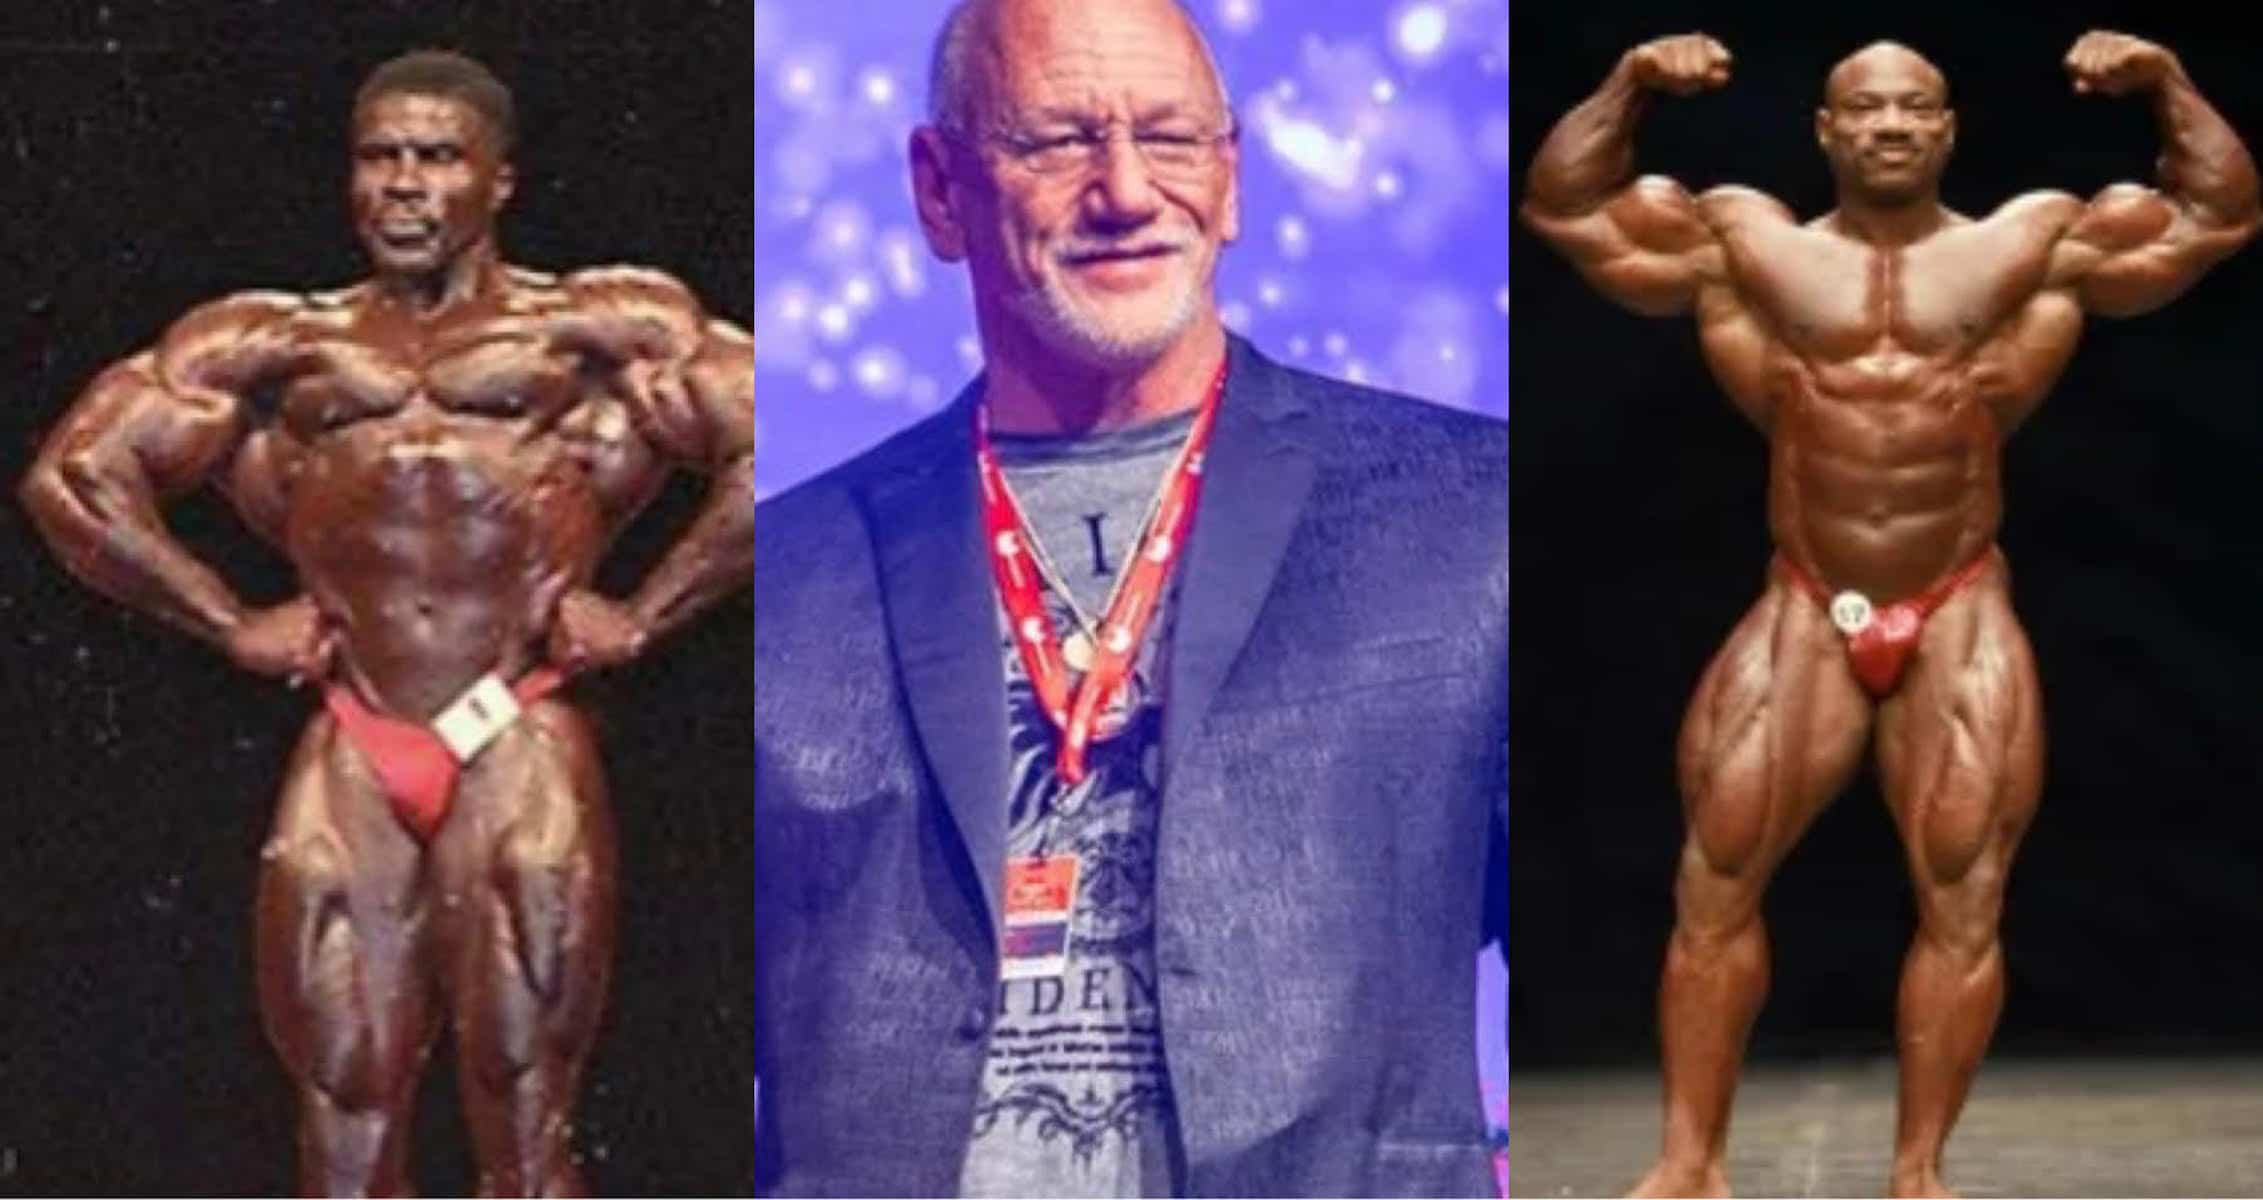 Masters Olympia Officially Set To Return In 2023 After 11-Year Absence